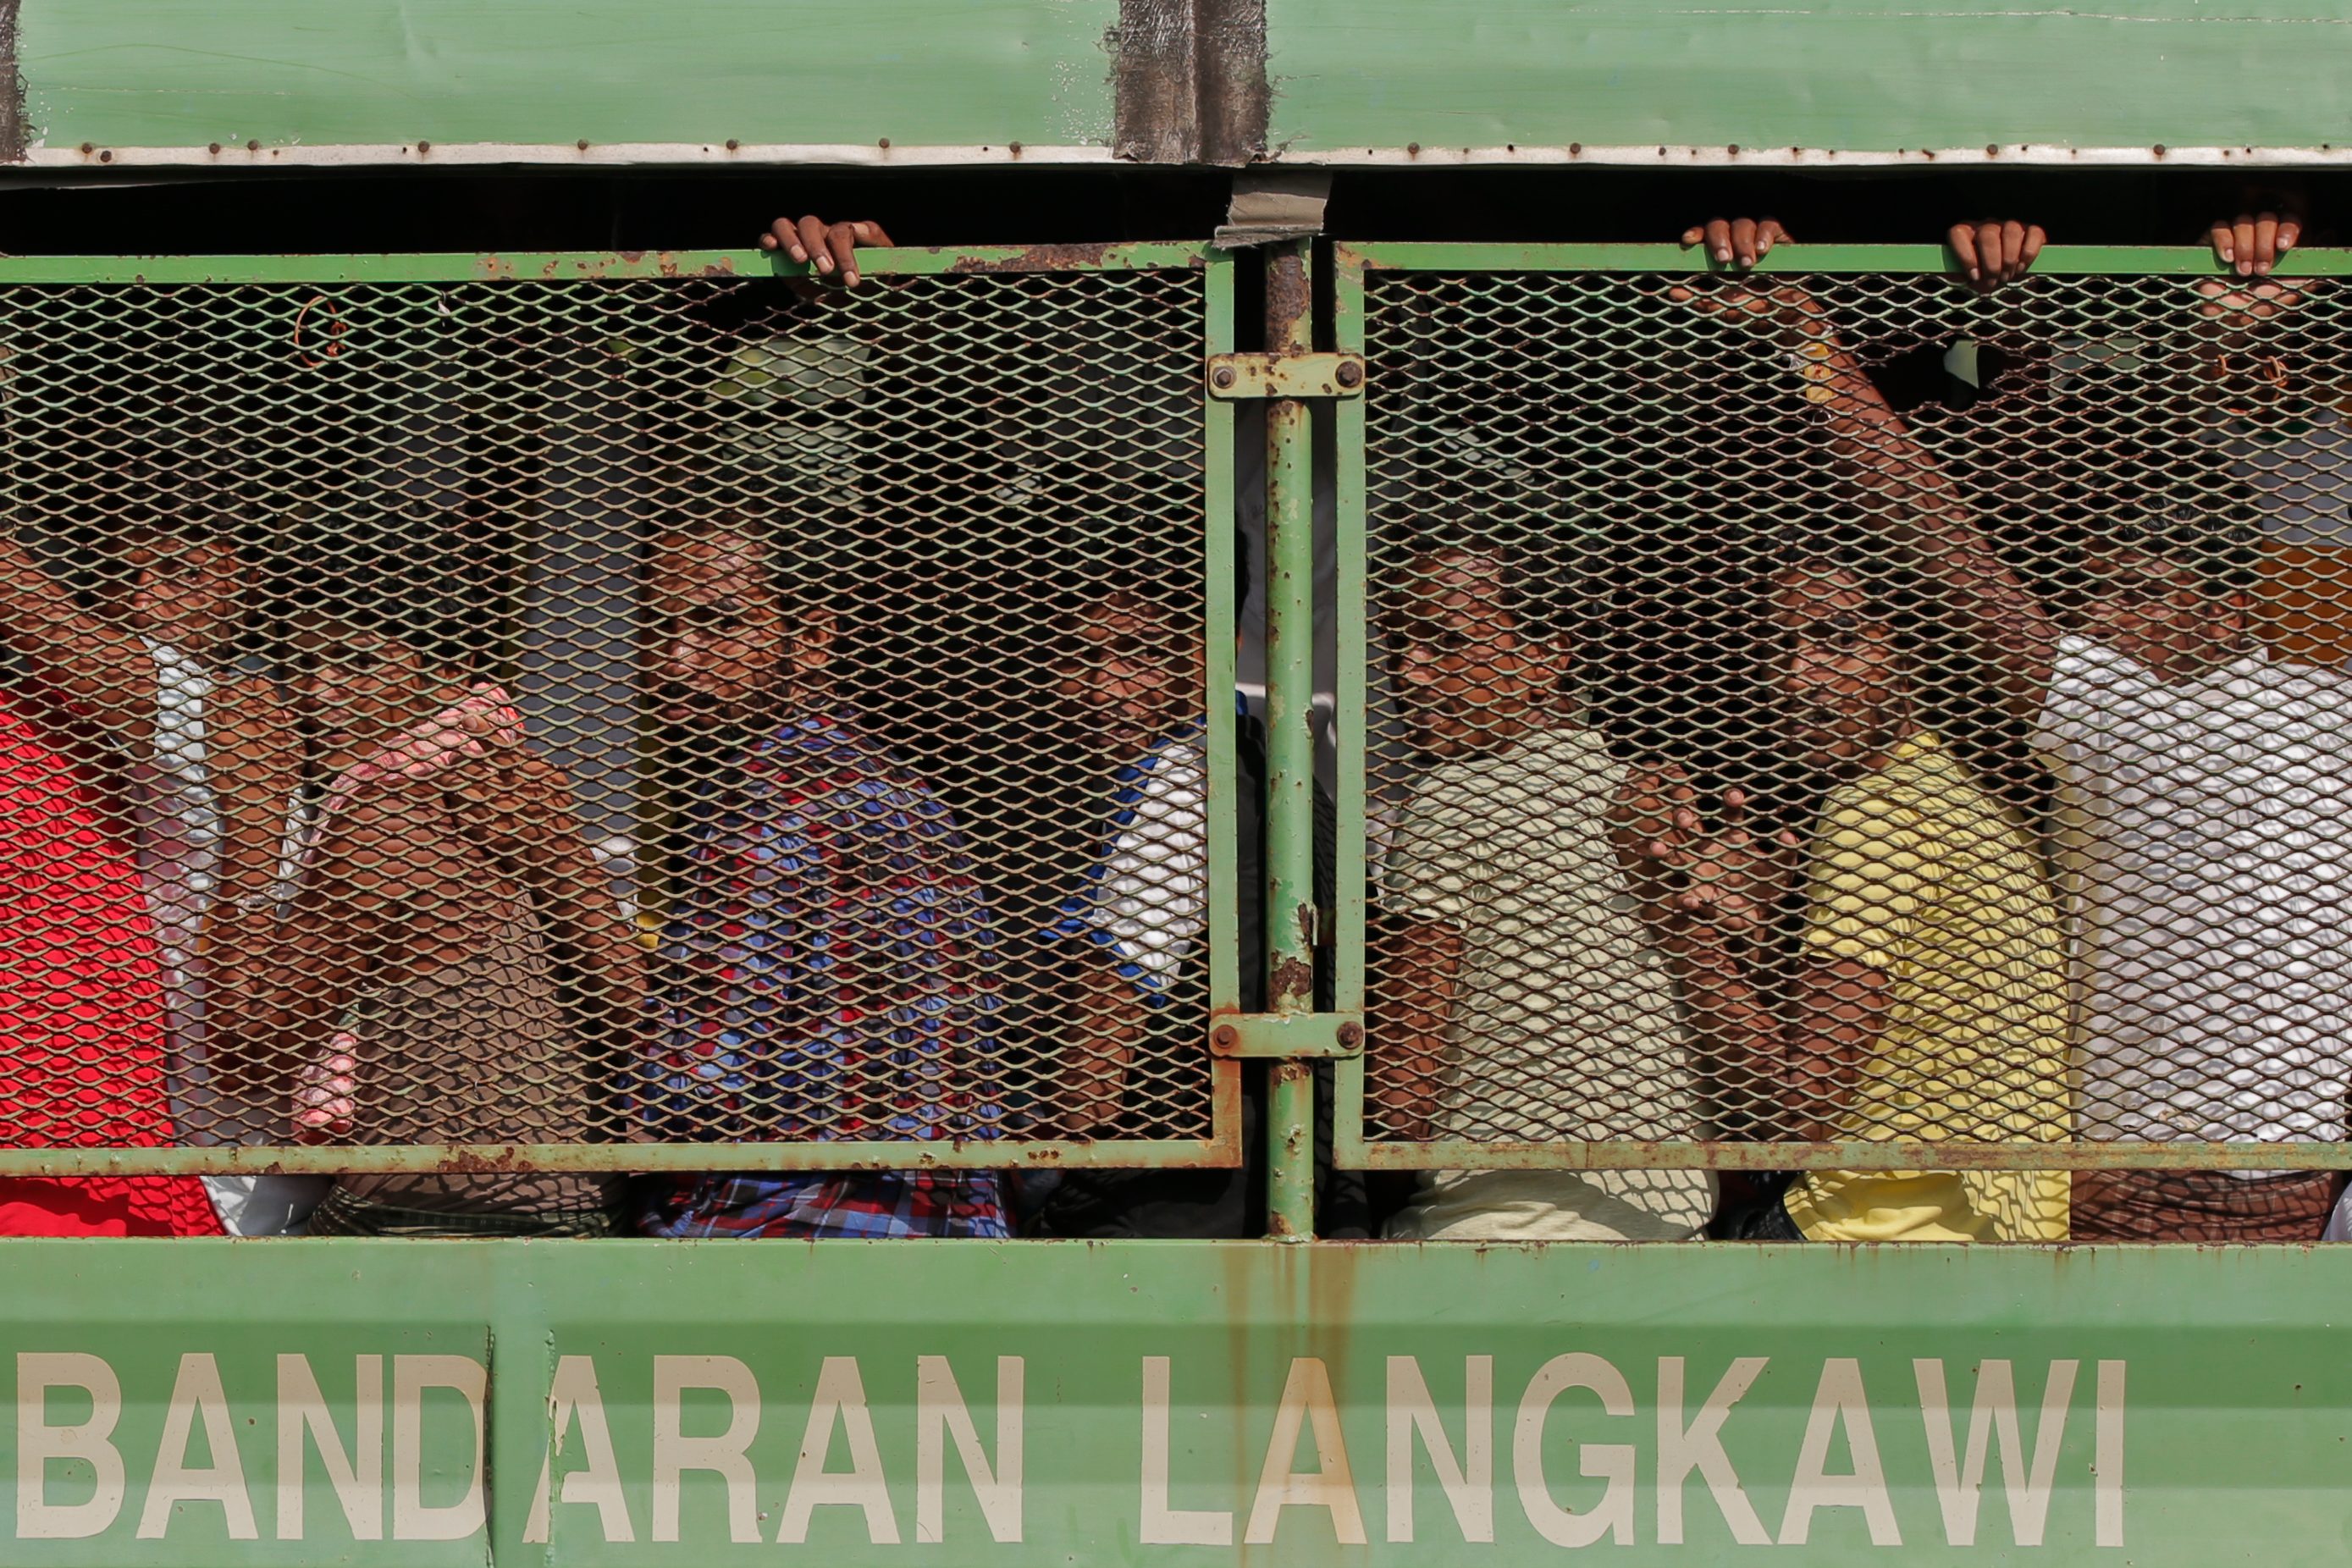 ASYLUM SEEKERS. Bangladeshi and Rohingya migrants are seen in a truck as they arrive at a naval base before being transferred to Kuala Kedah jetty with the navy ship 'KD Mahawangsa', in Langkawi, Malaysia. Photo by: EPA/Fazry Ismail 